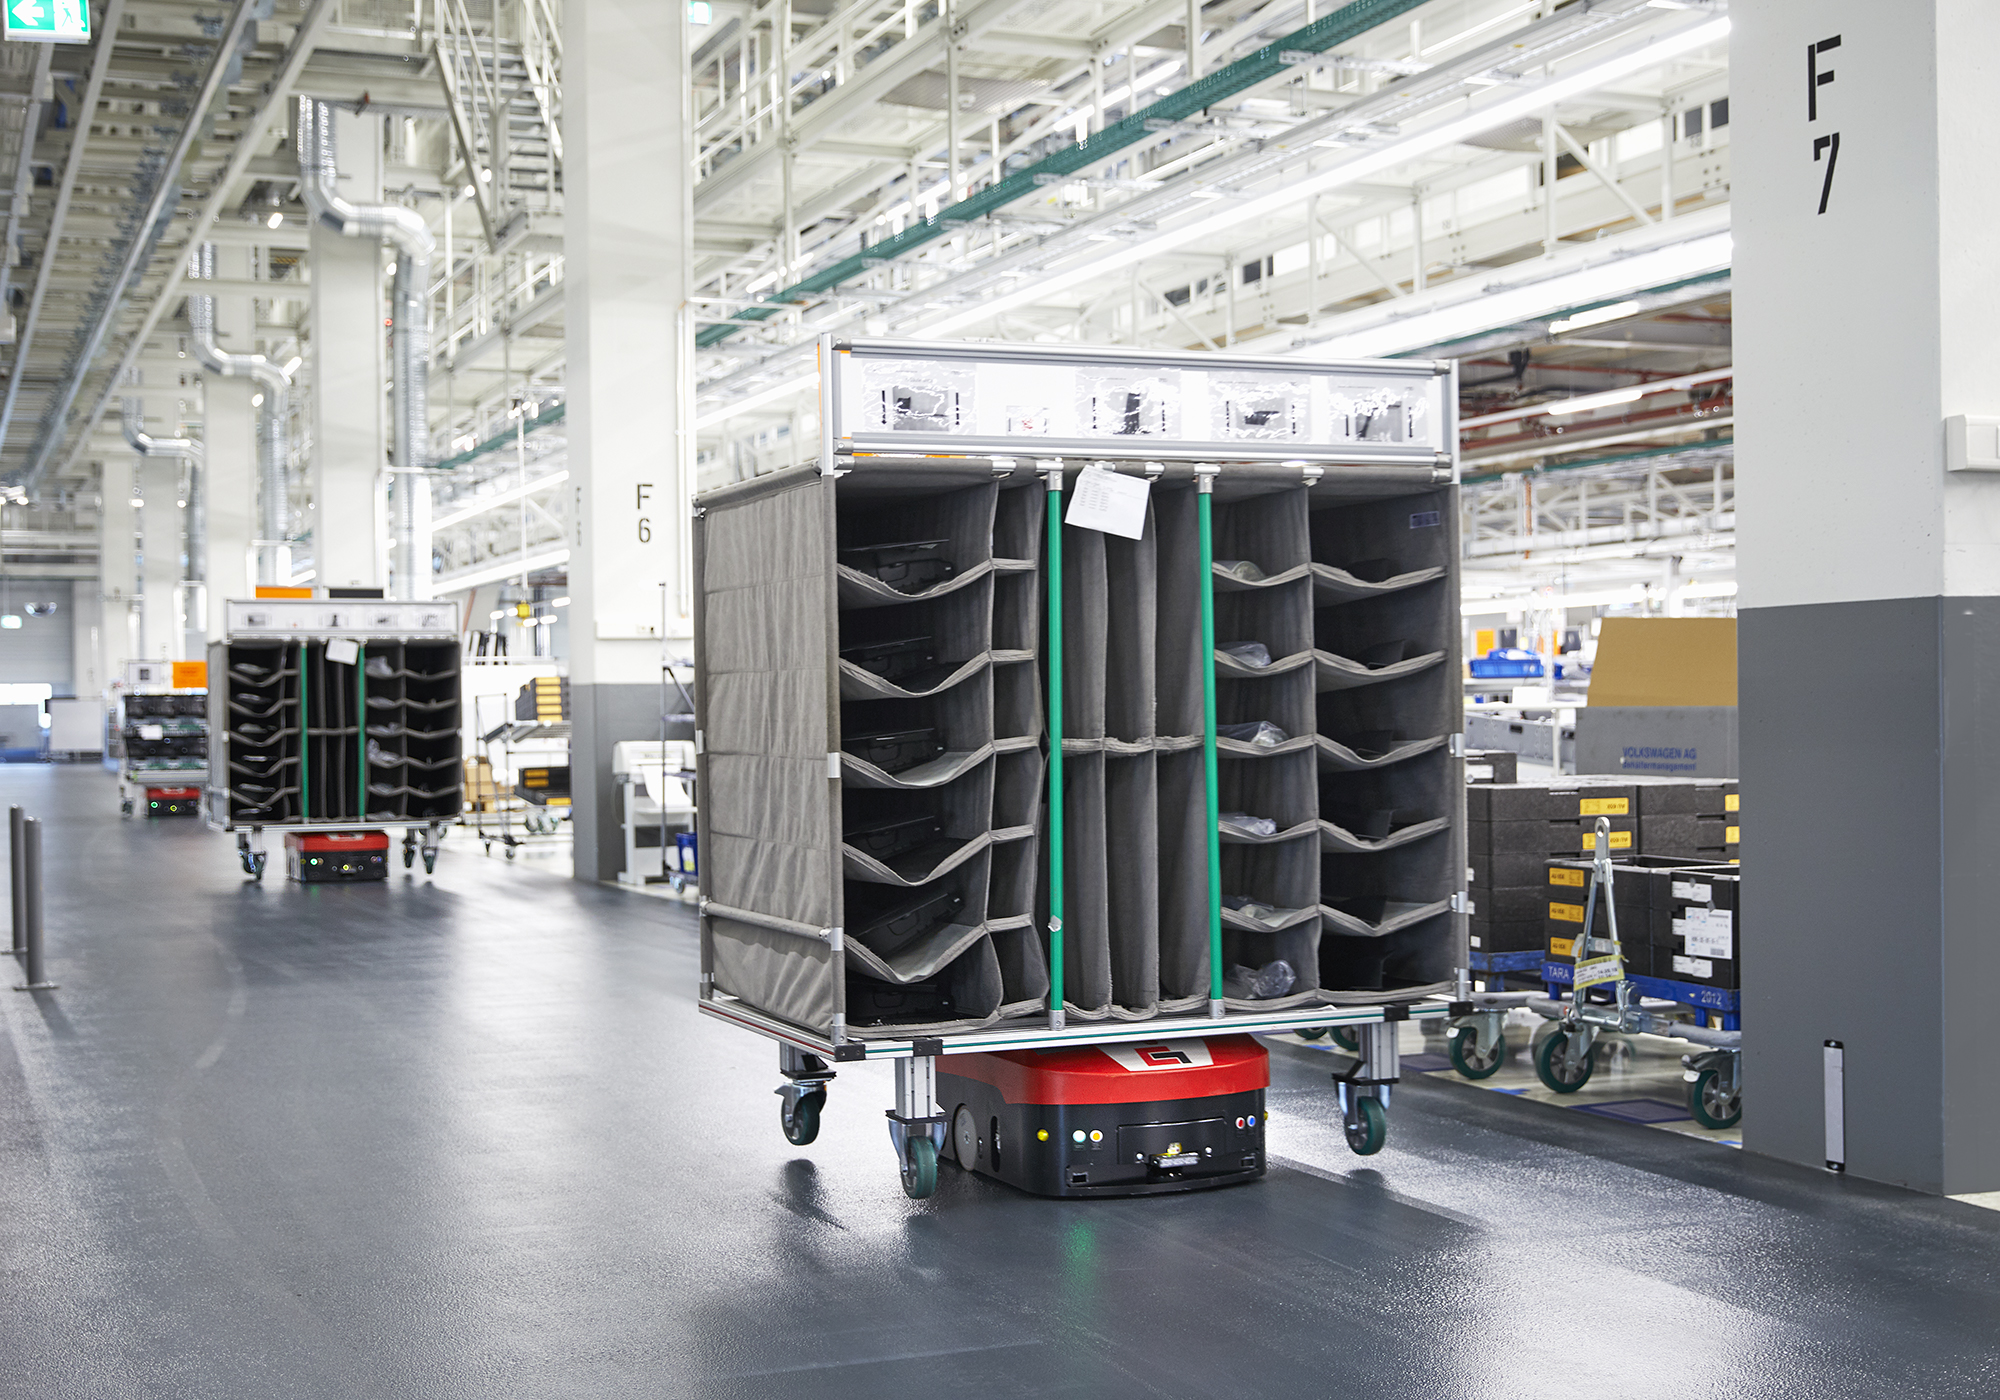 Automated Guided Vehicles (AGVs) enable efficient, reliable and flexible production.